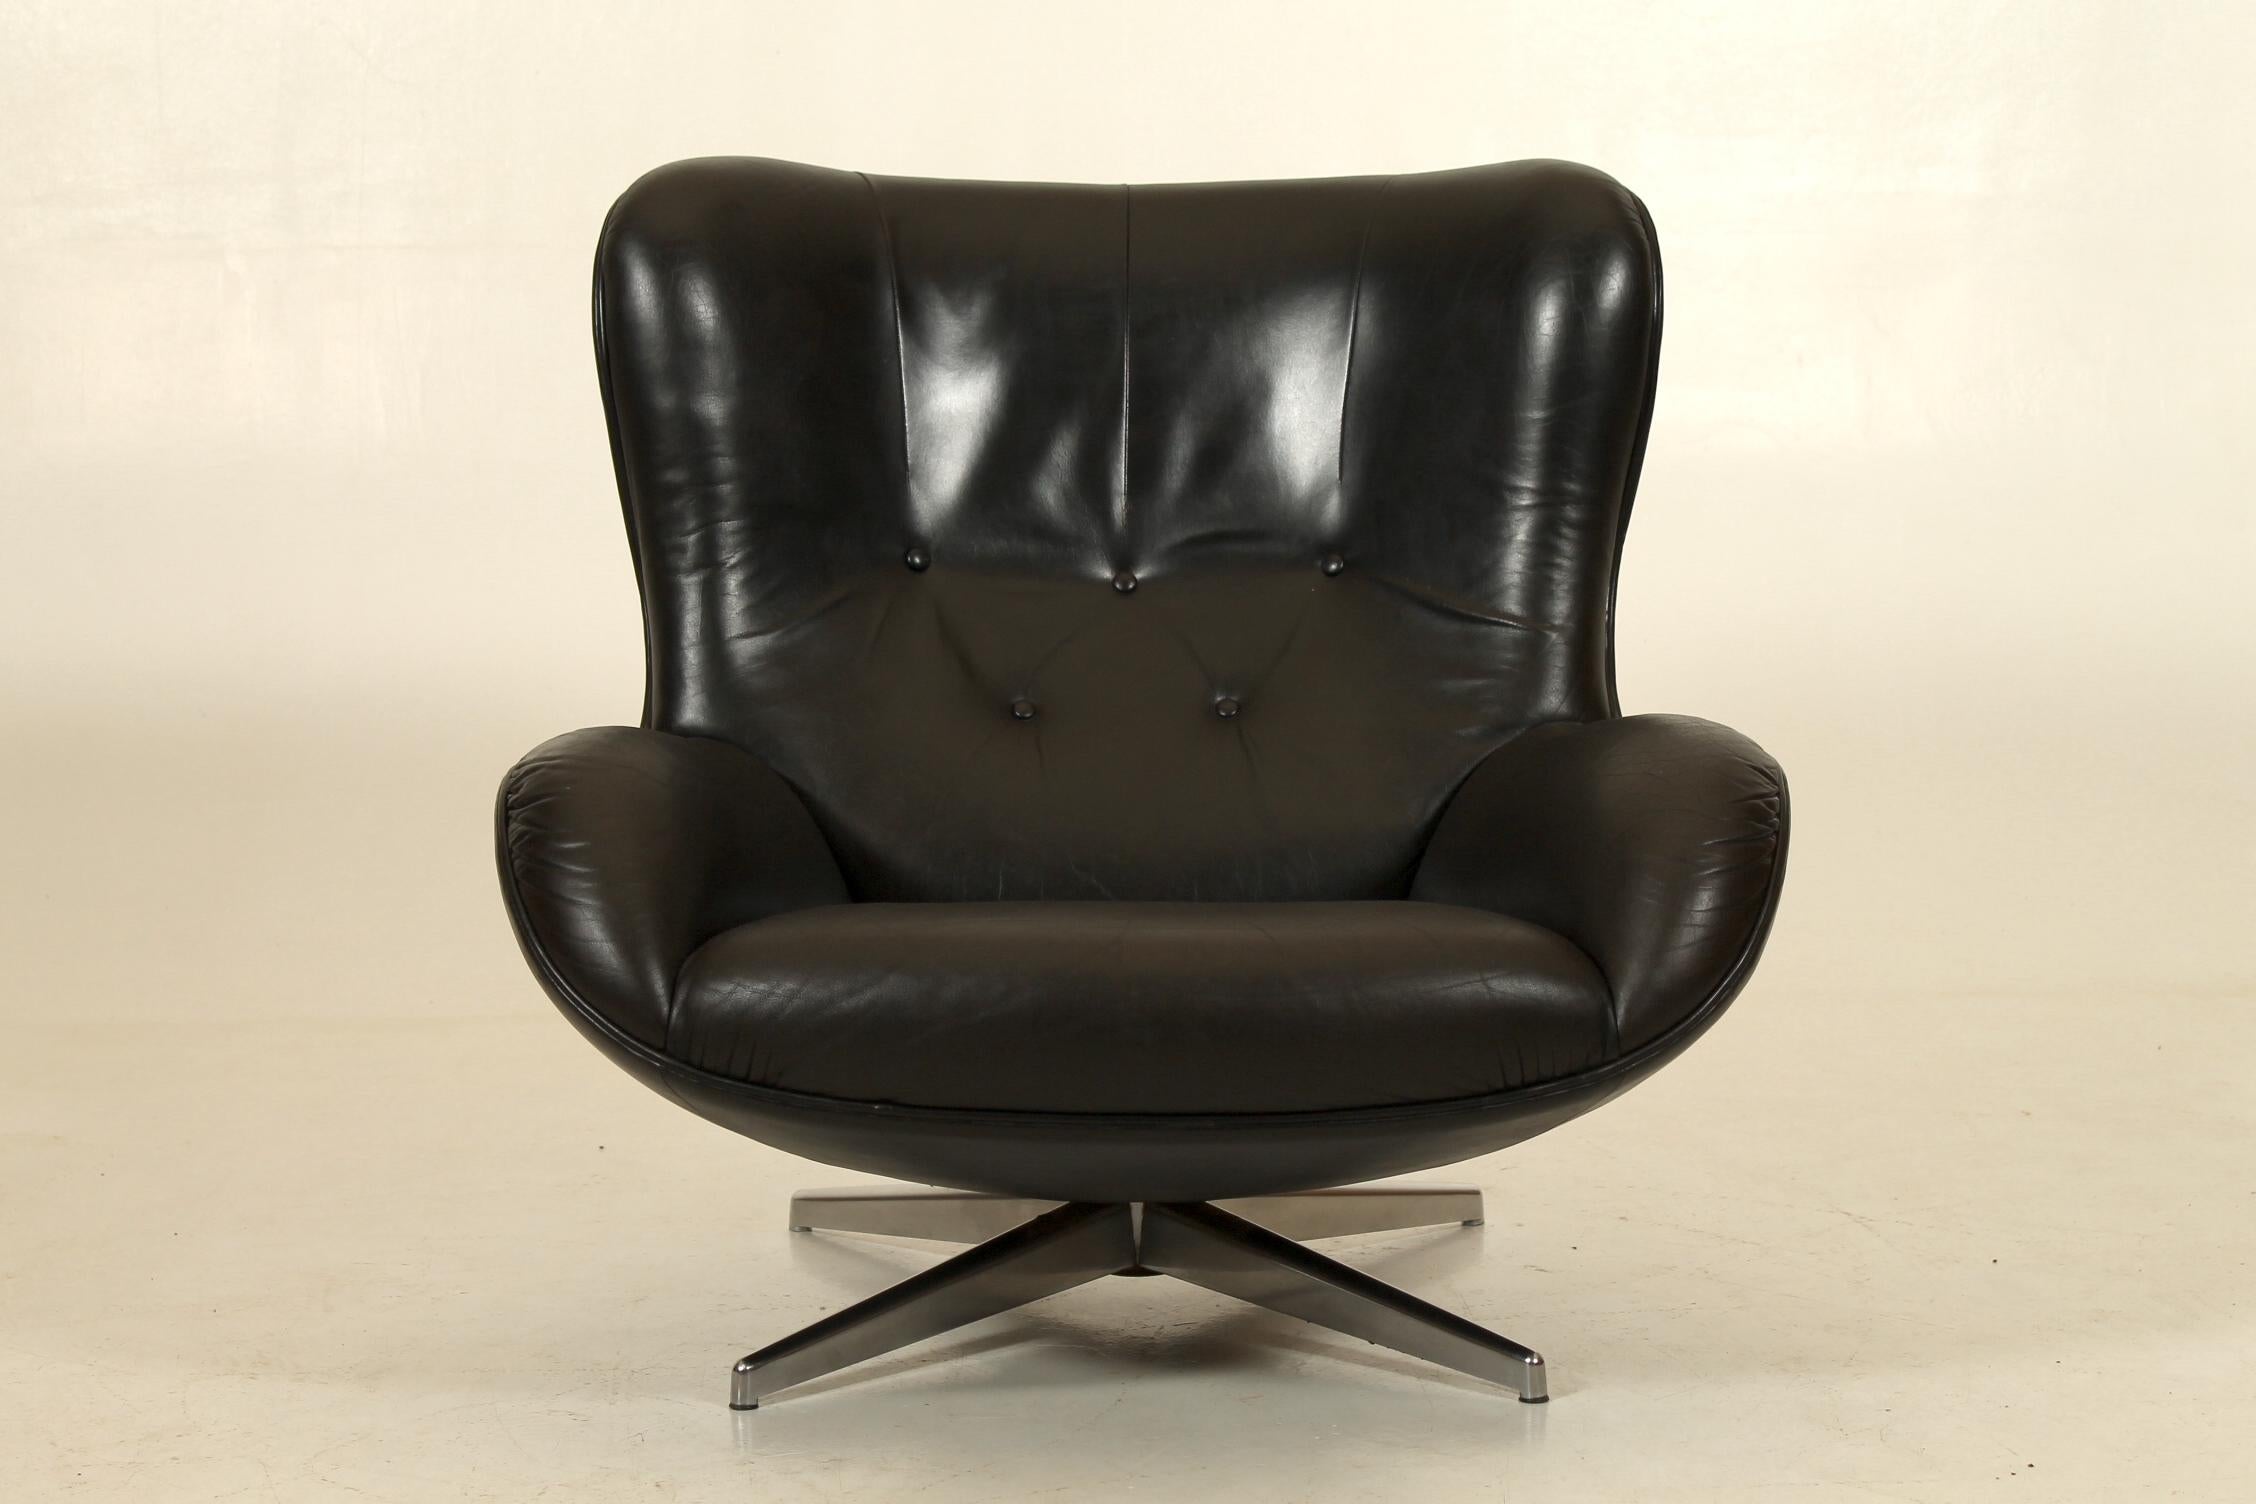 Organic shaped easy chair in patinated black leather with a beautiful contrast of materials leather and steel. Designed in the early 1960s by Illum Wikkelsø. Manufactued by A. Mikael Laursen, Denmark. 
Swivel lounge chair model ML214.